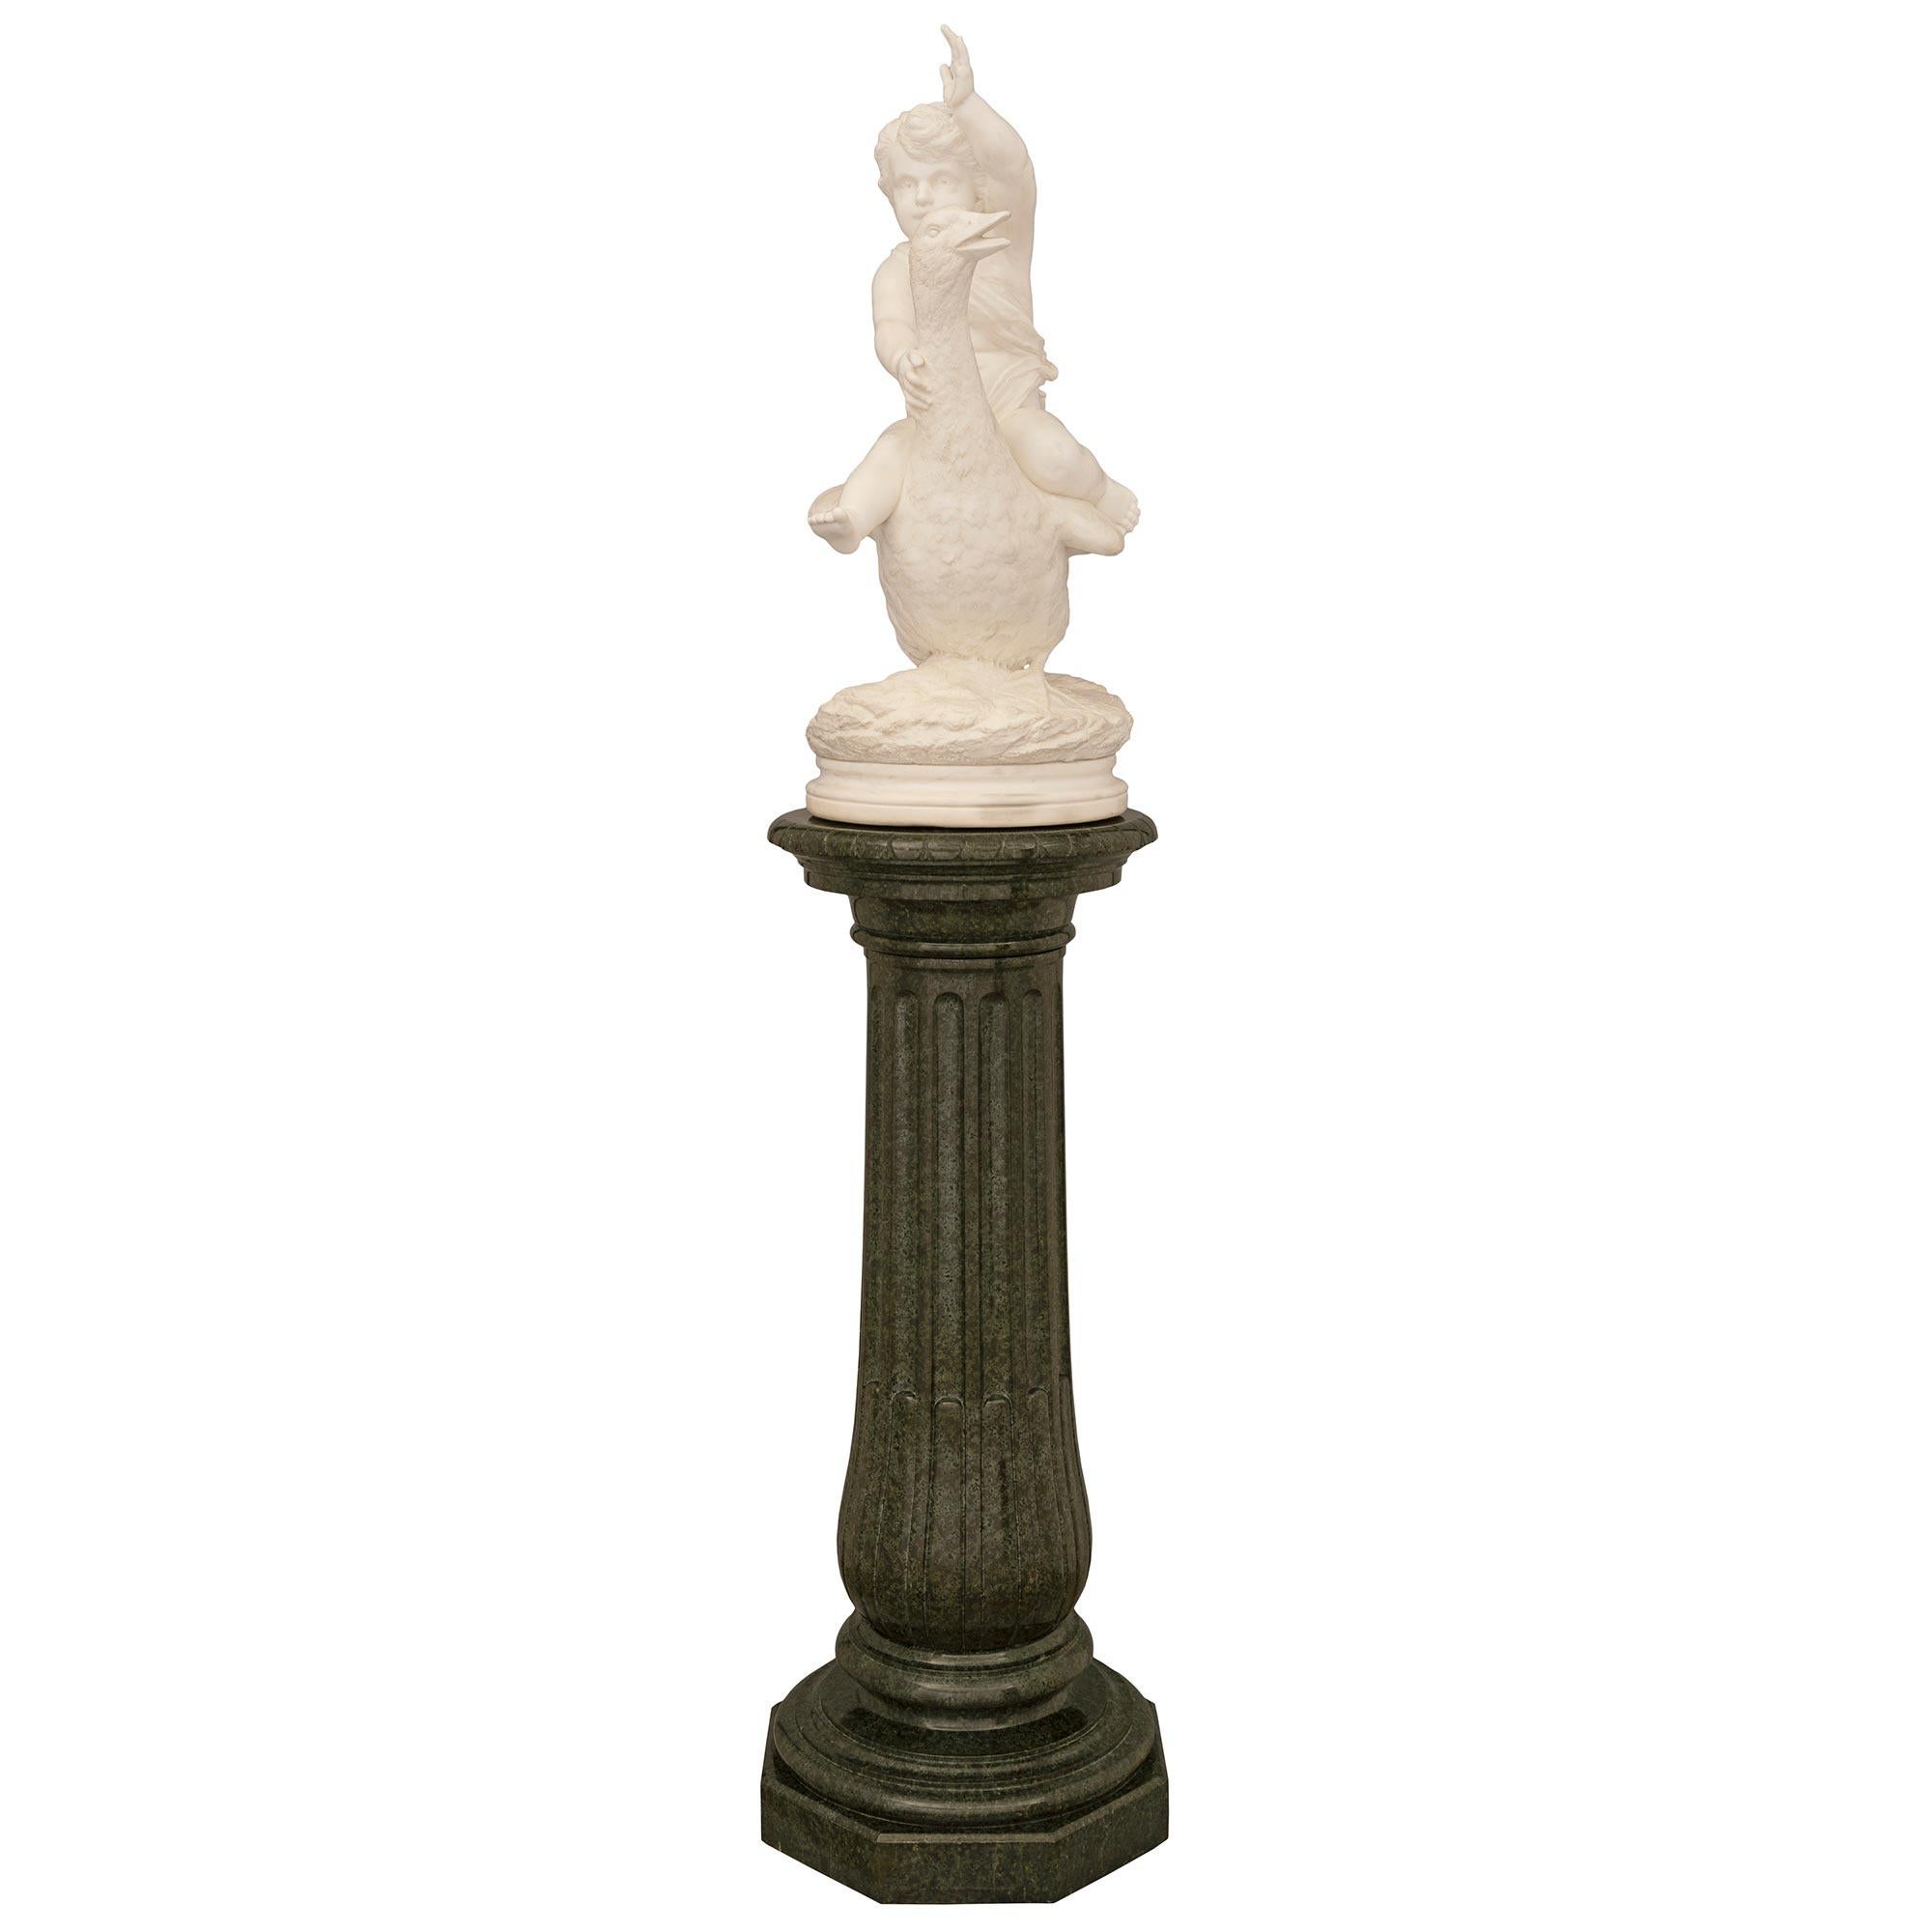 Italian 19th Century White Carrara Marble Statue on Its Original Pedestal In Good Condition For Sale In West Palm Beach, FL